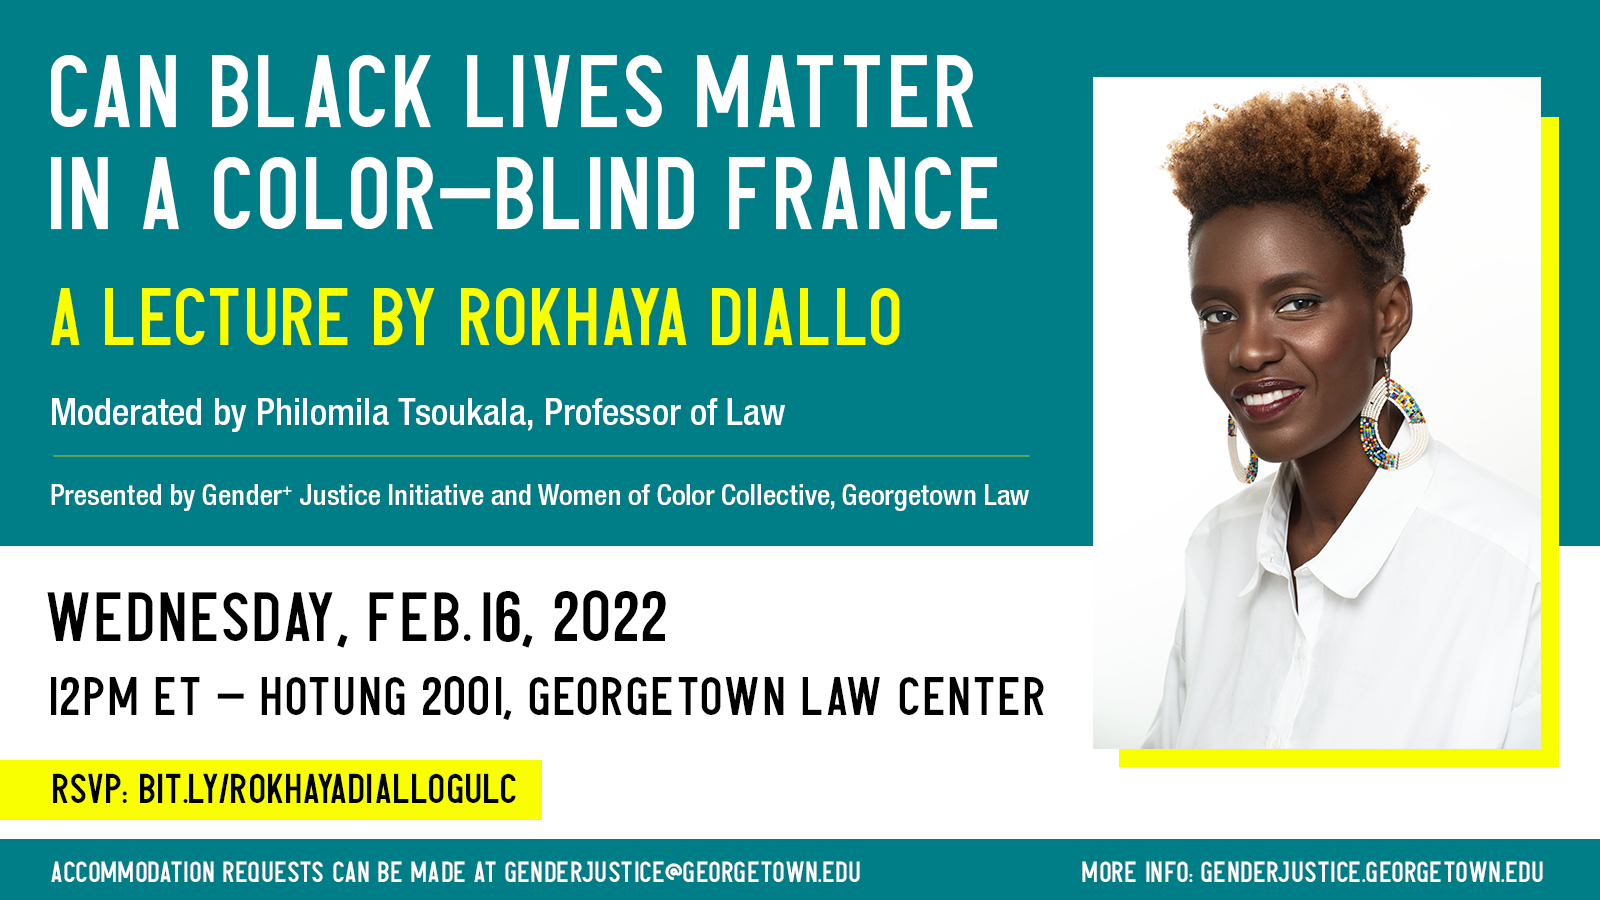 Event Flyer with Details and Headshot of Rokhaya Diallo